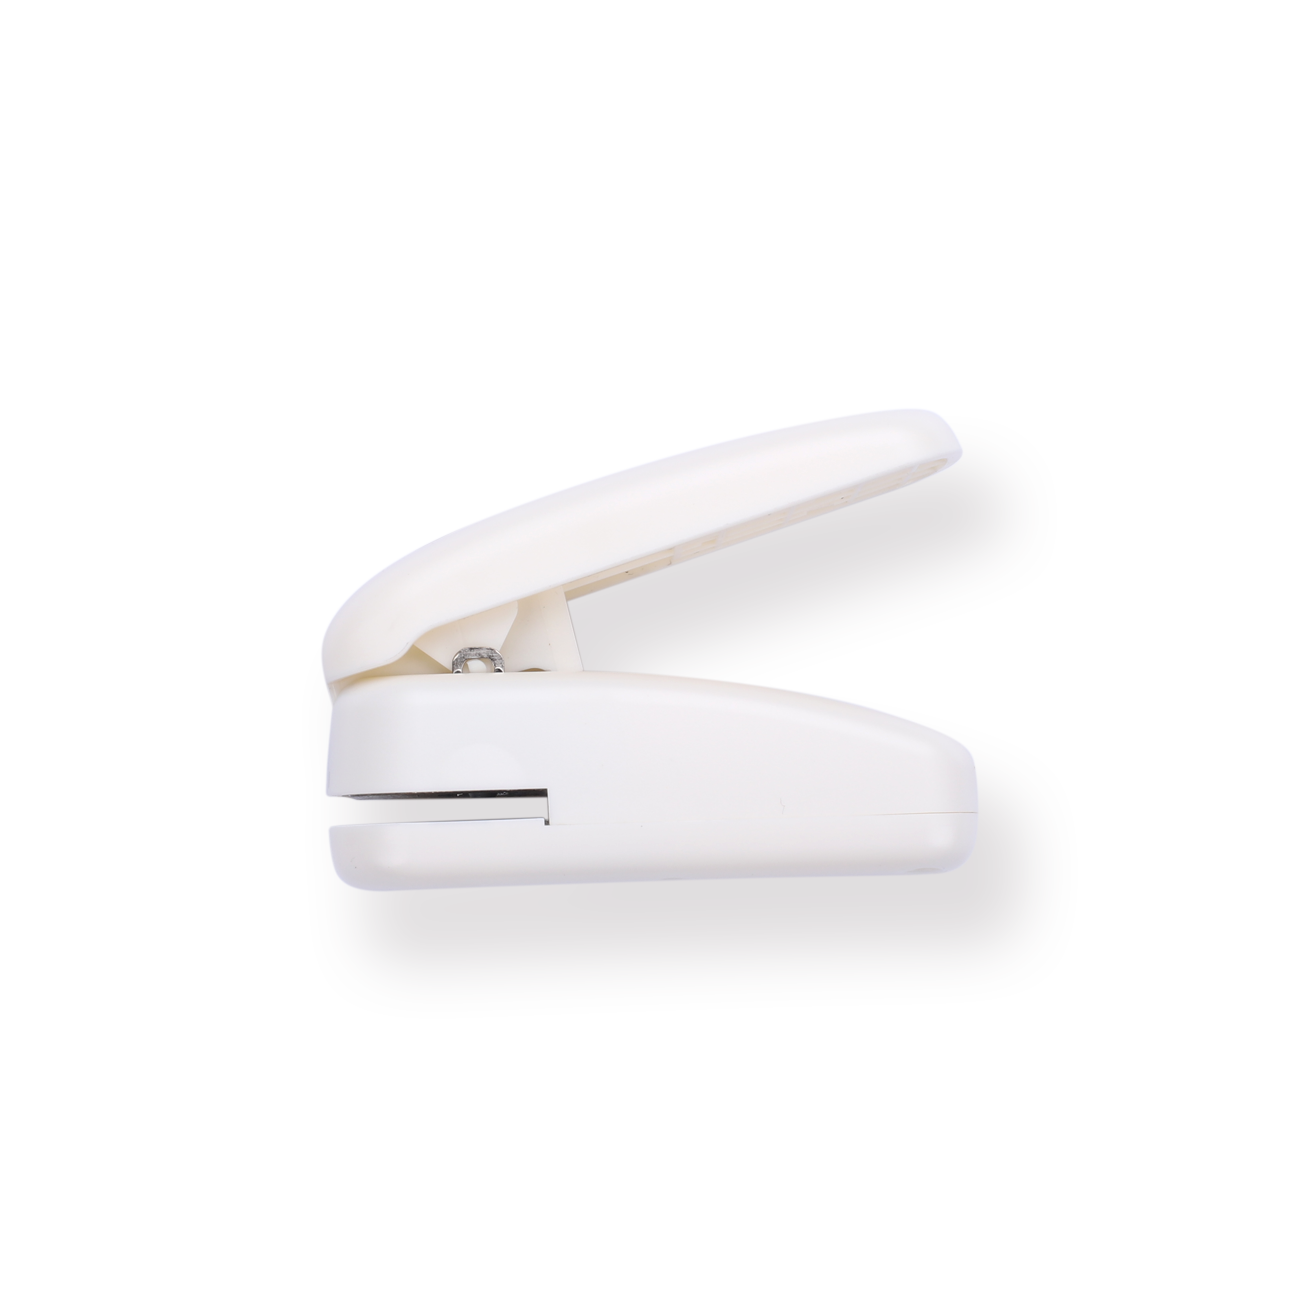 Donuts Hole Punch - Stationery Pal